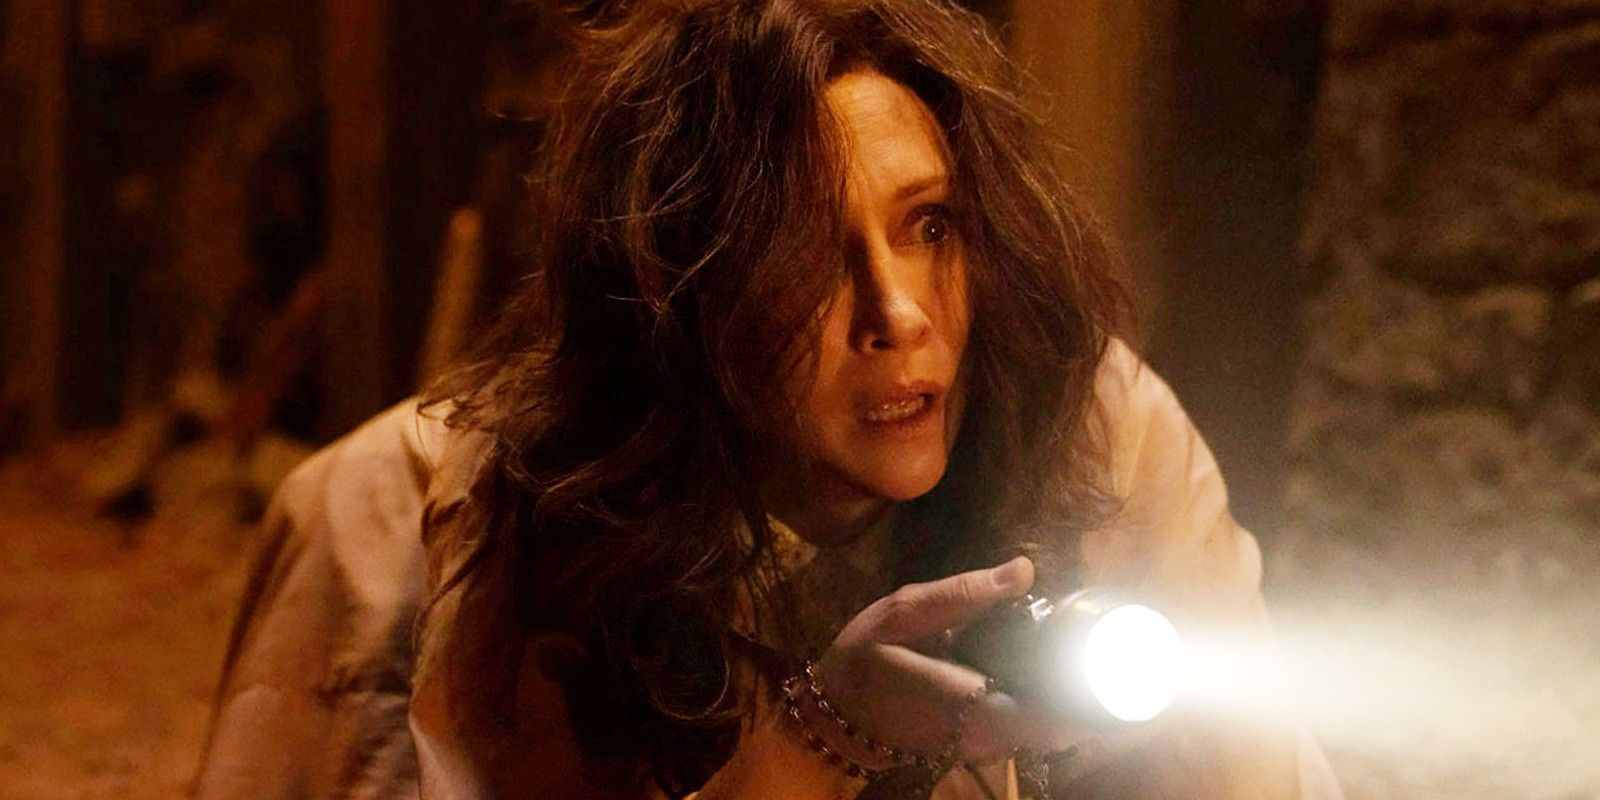 The Conjuring 3 Star Charlene Amoia Details Spooky Occurrences on Set